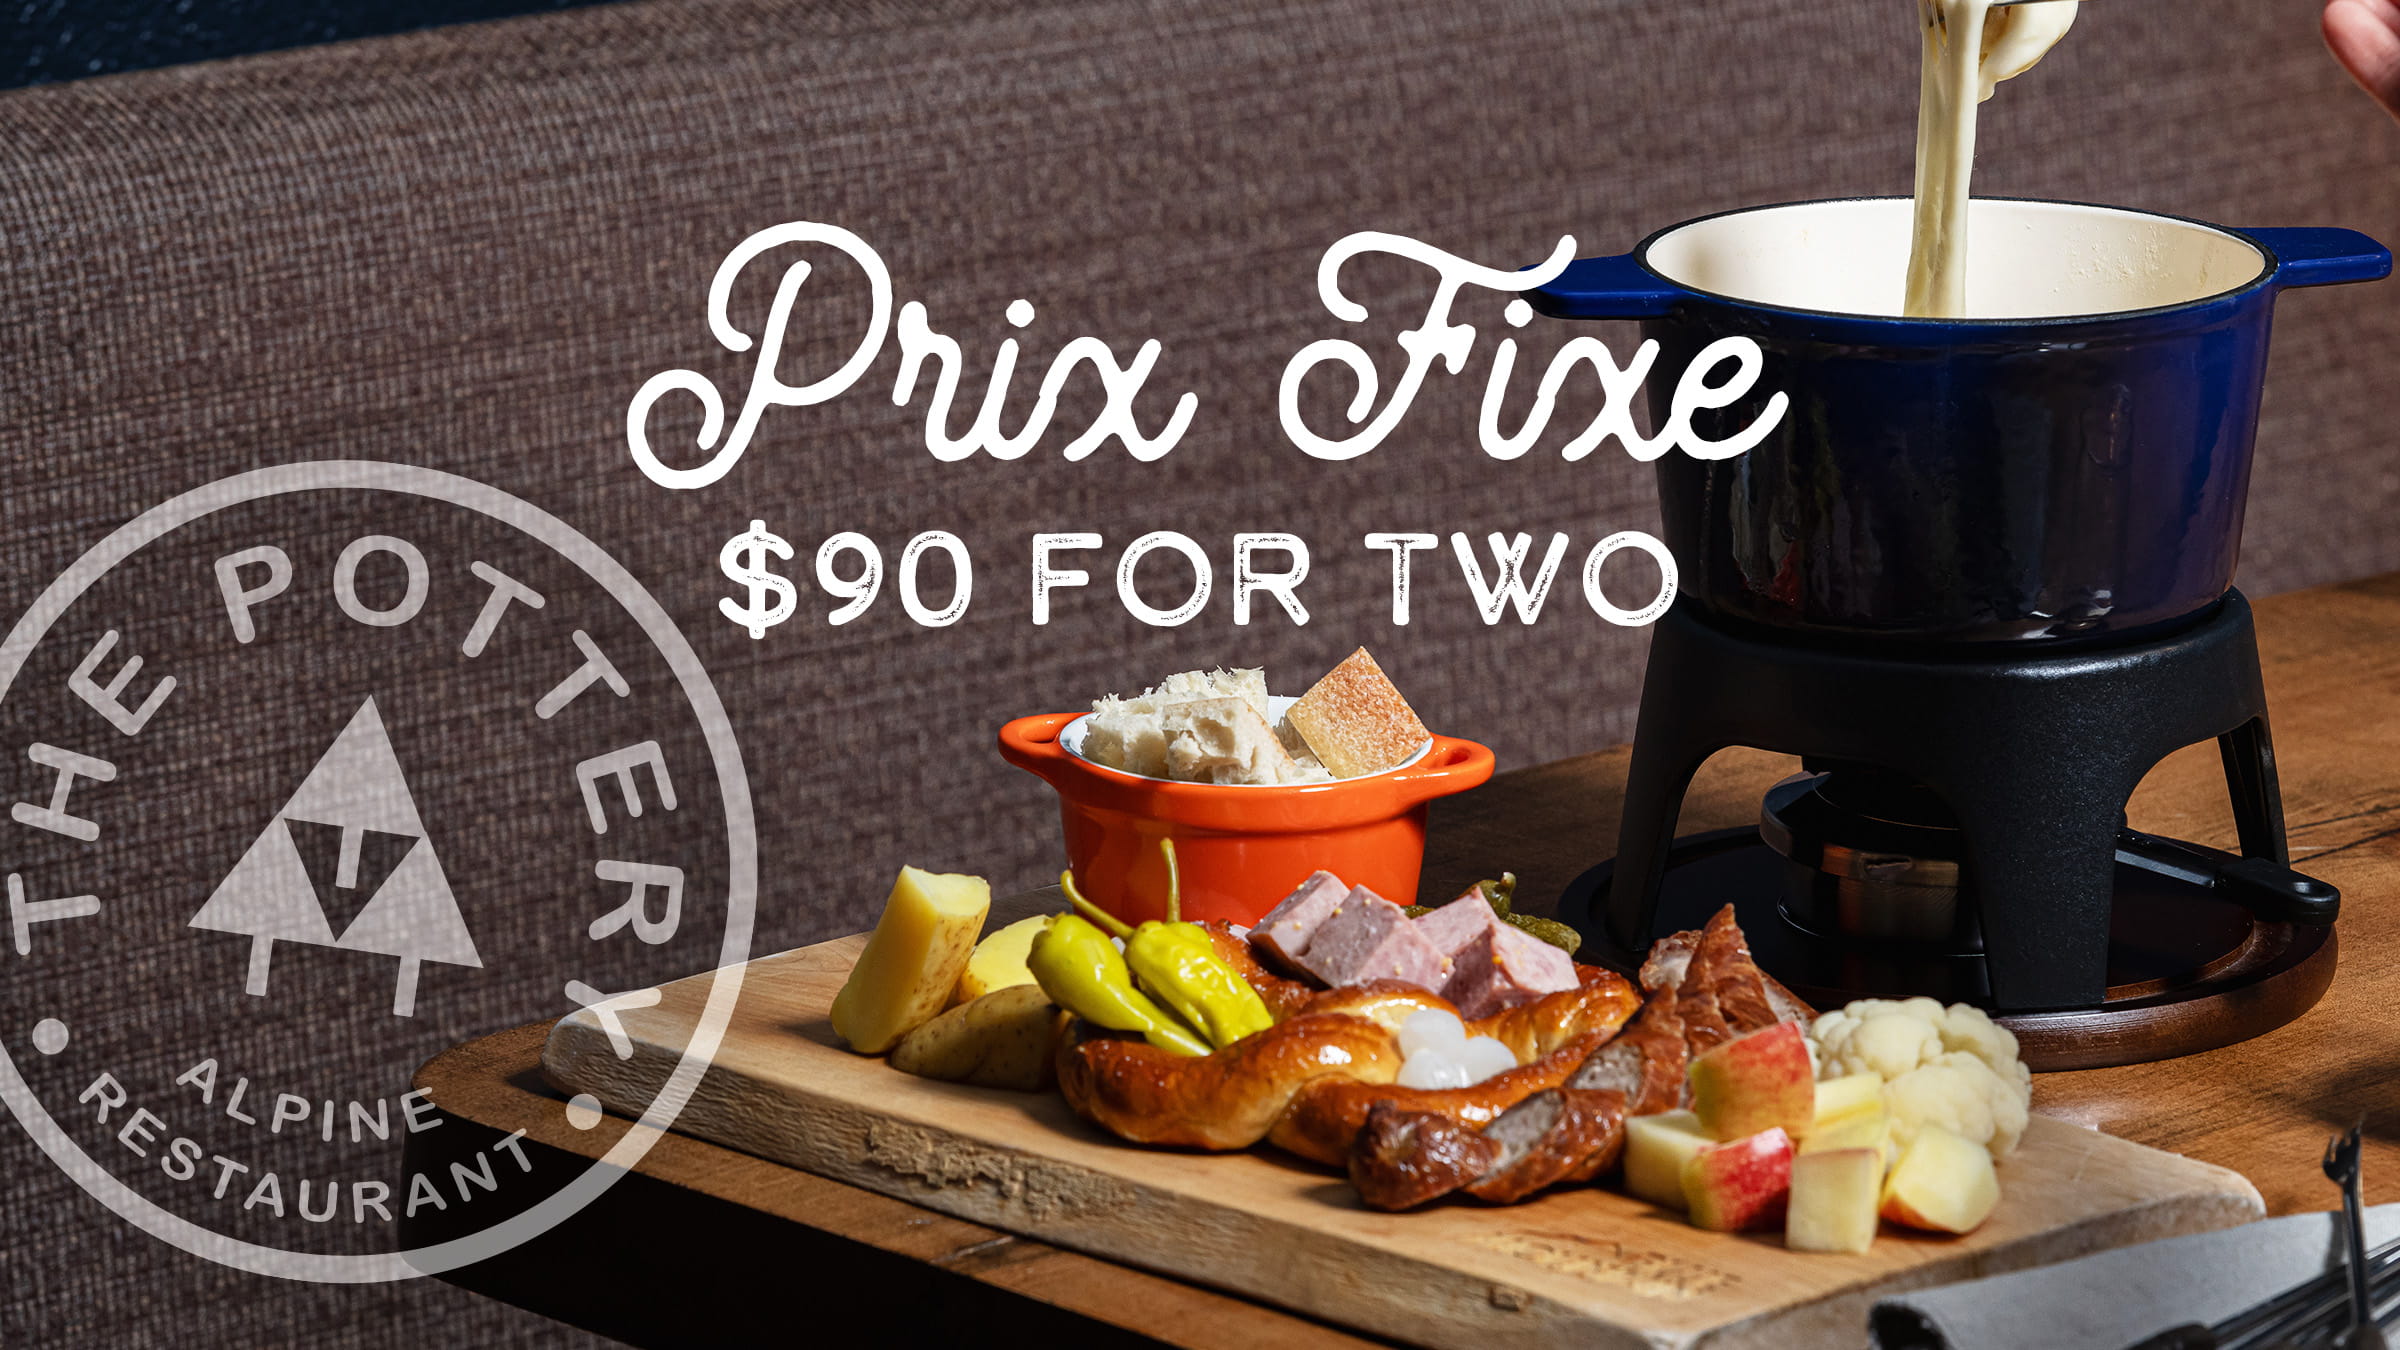 Prix Fixe Dinner for Two at The Pottery Alpine Restaurant